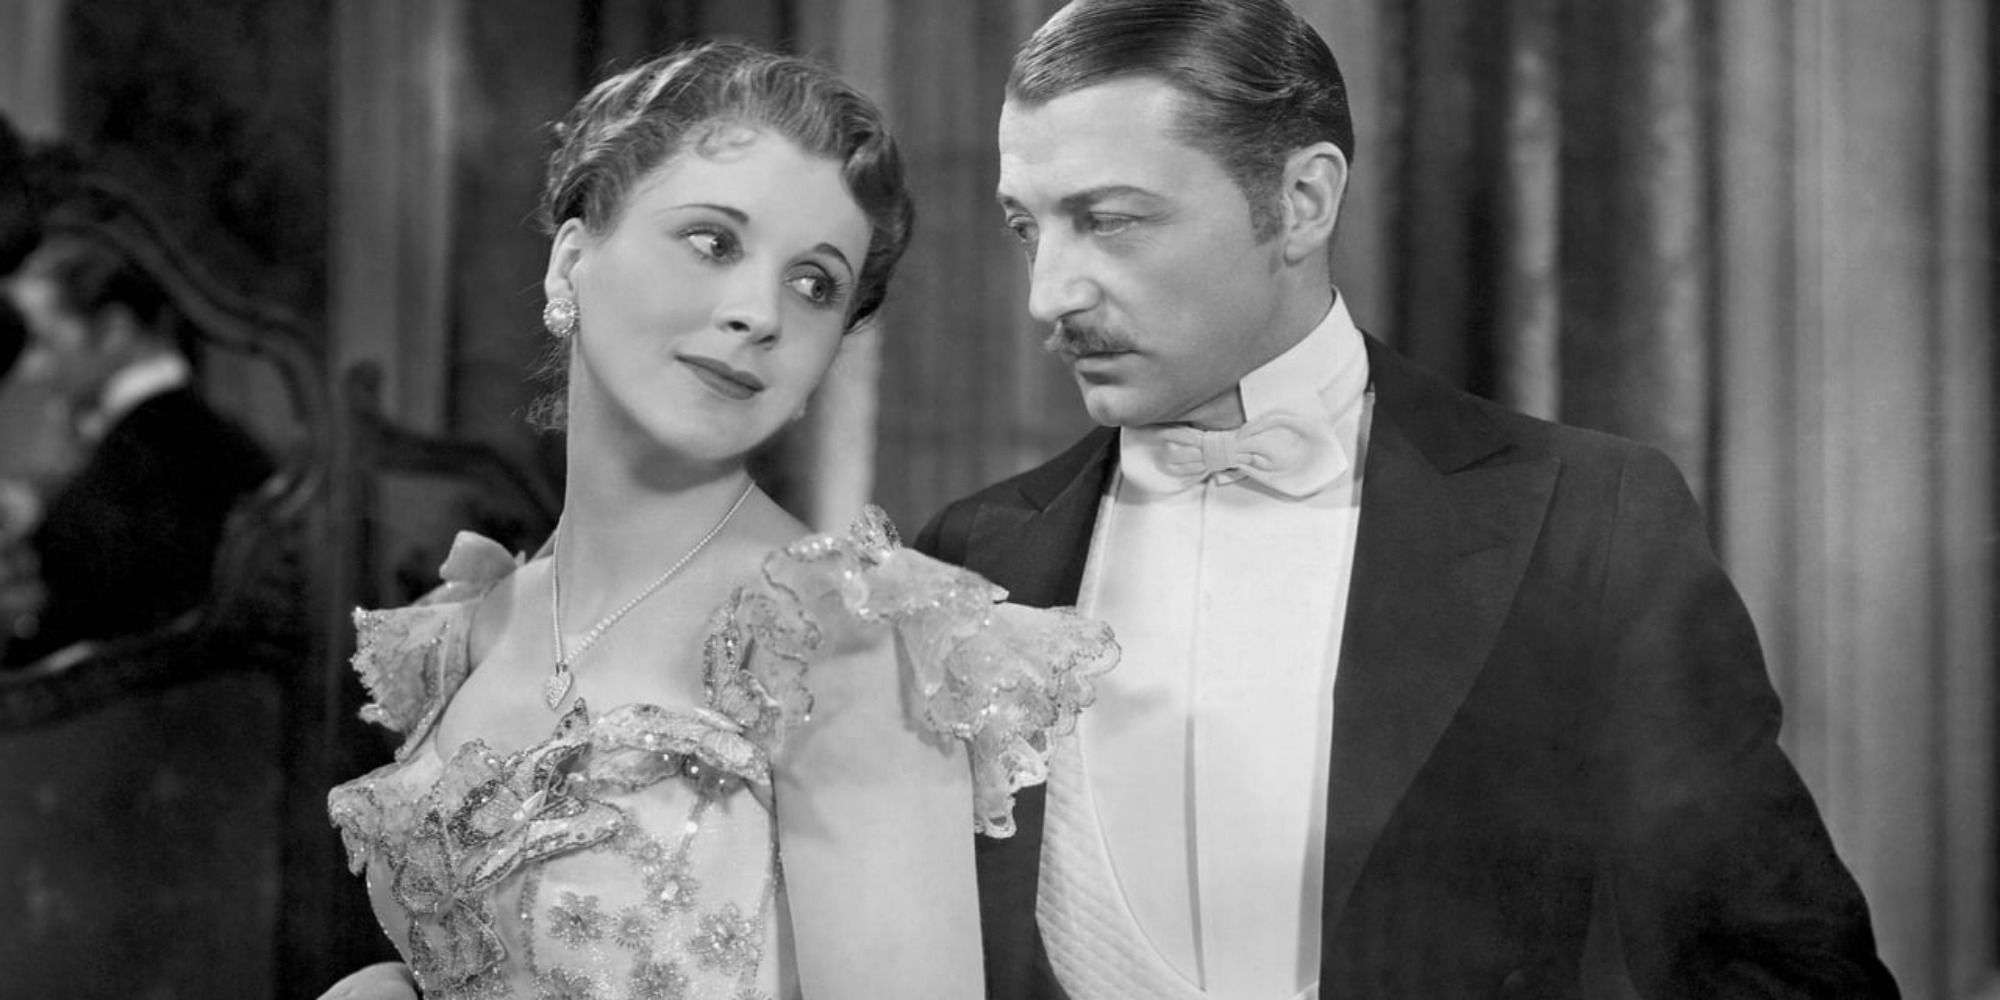 A man and a woman at a party in the film Cavalcade